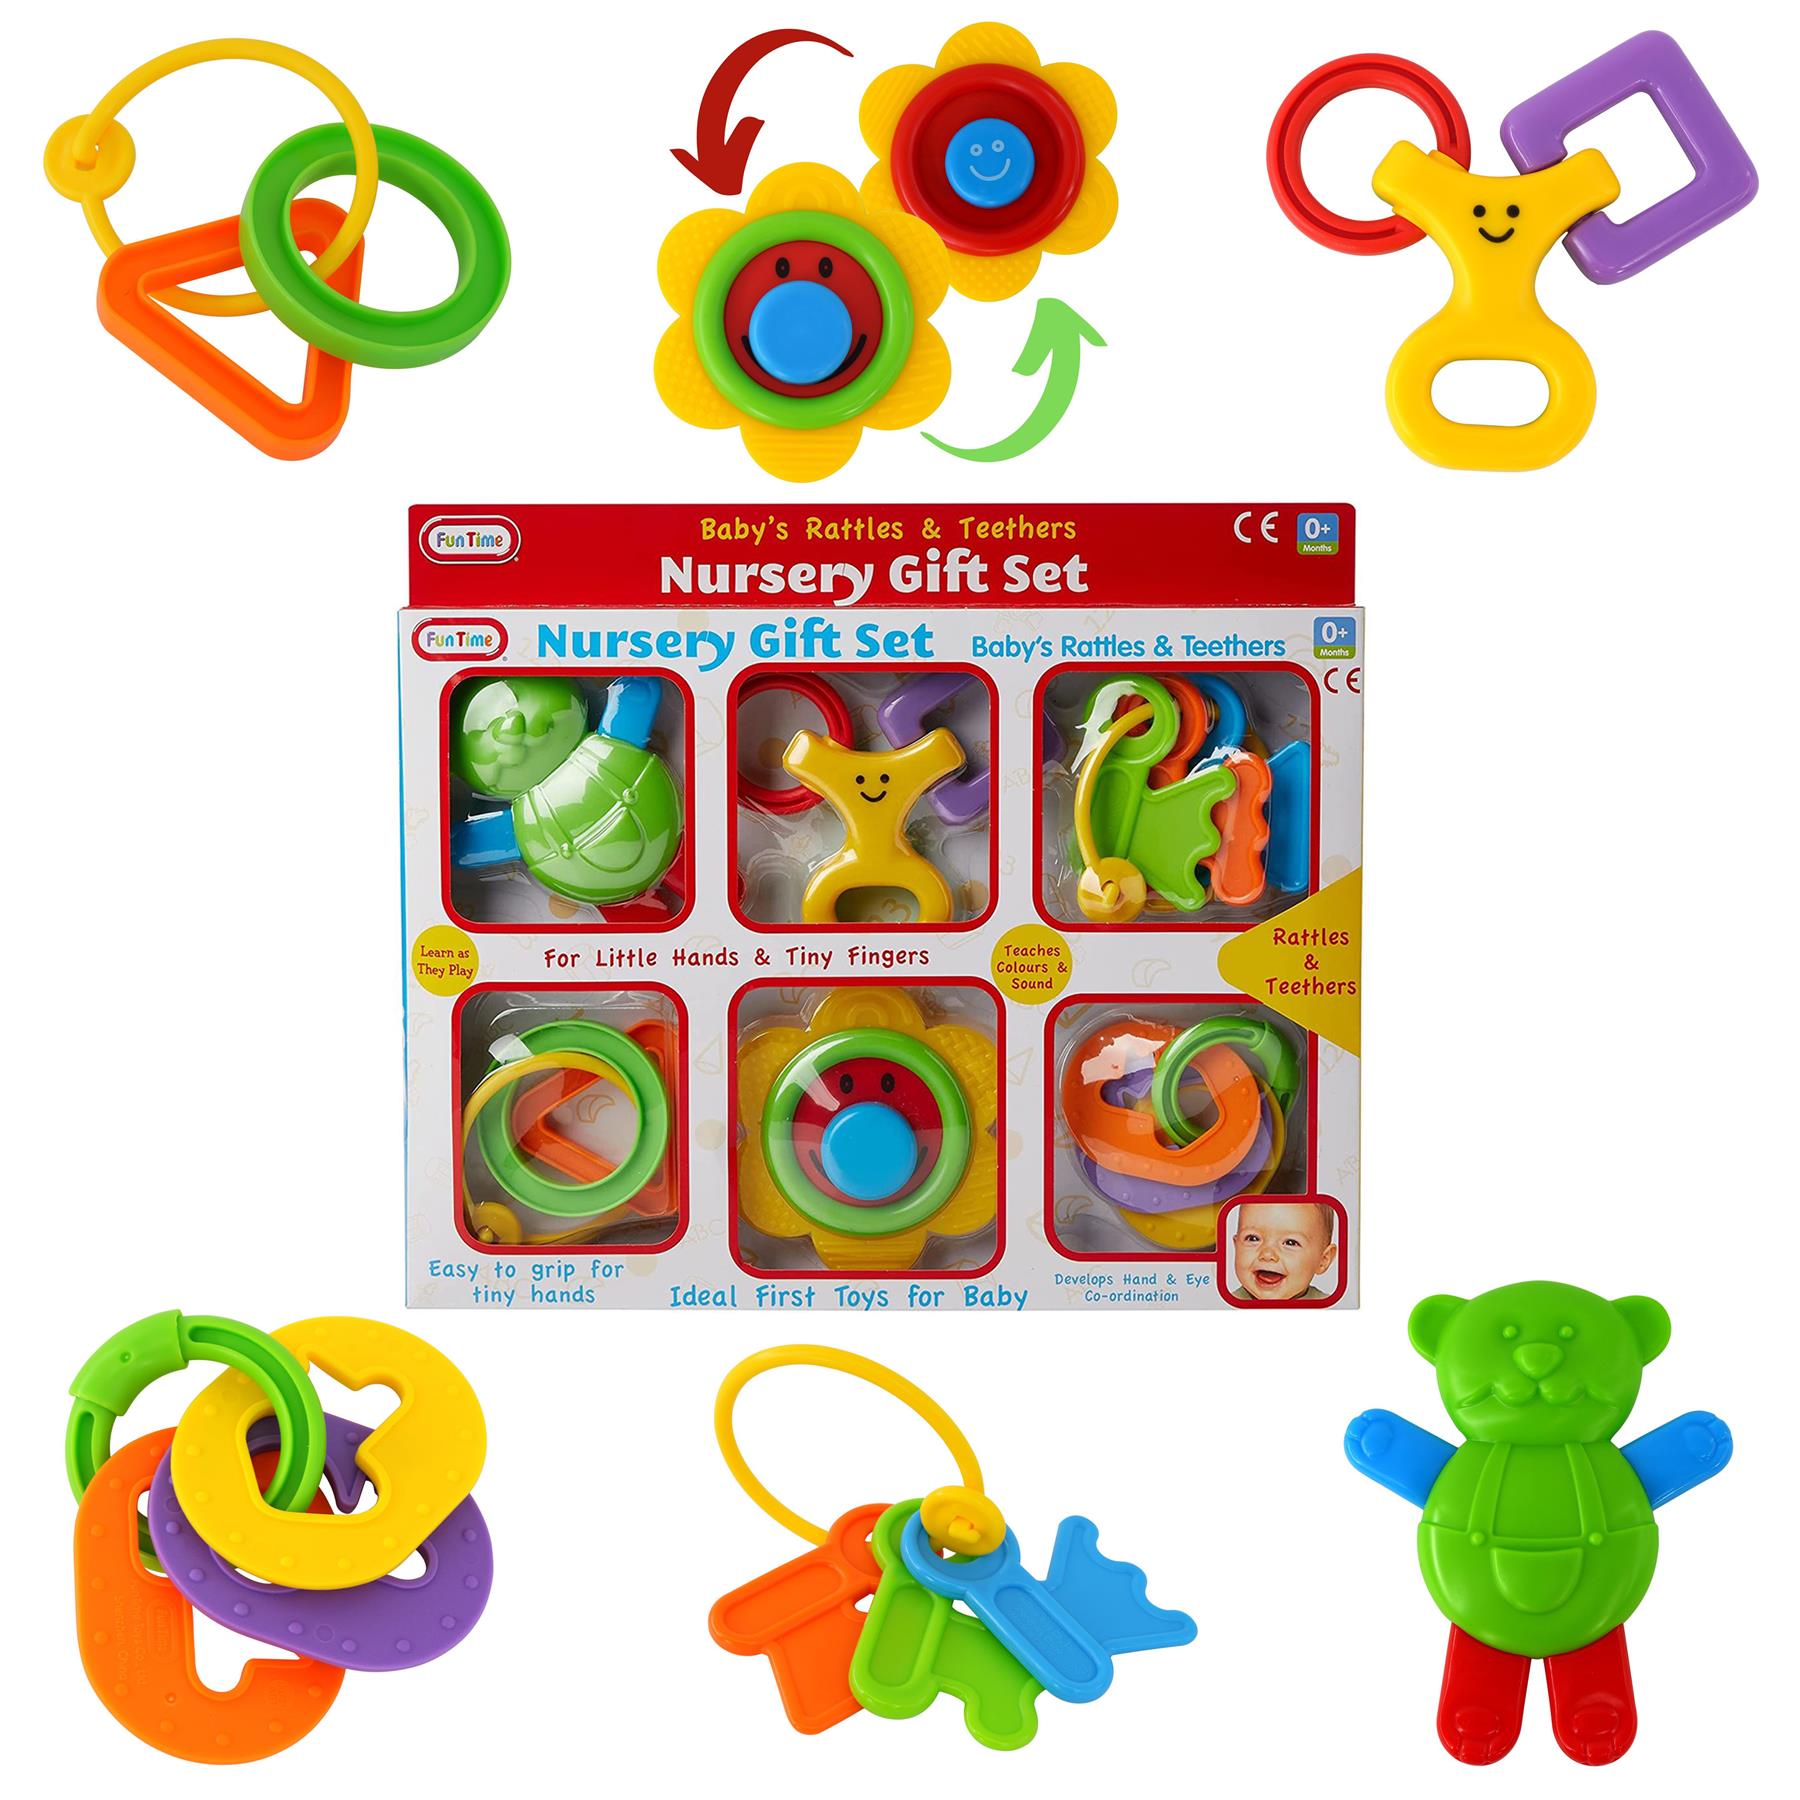 Baby Rattles And Teethers by The Magic Toy Shop - The Magic Toy Shop